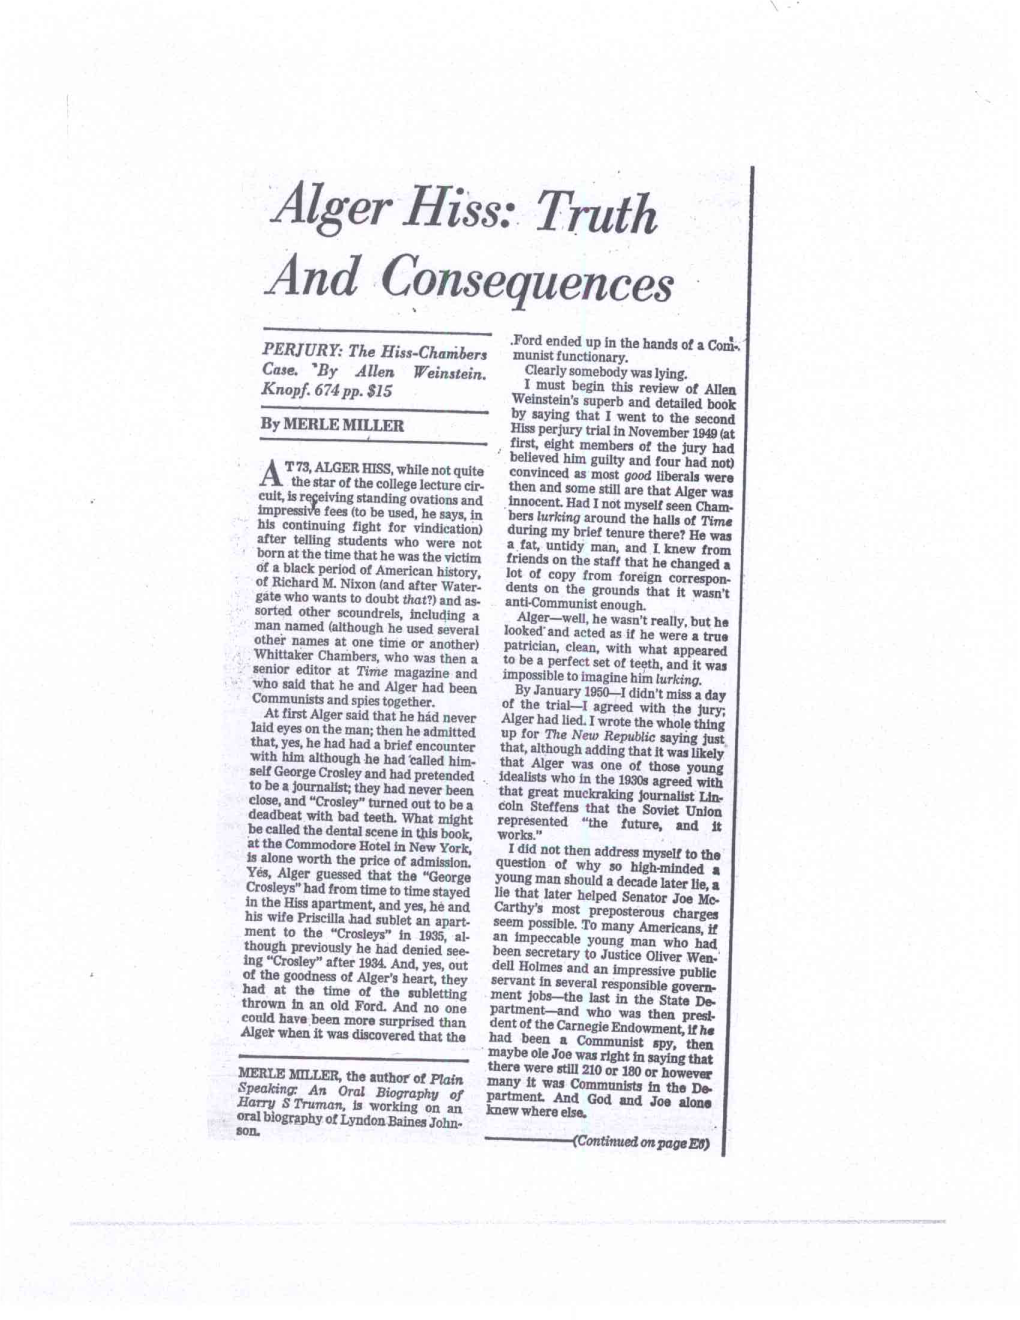 Alger Hiss: Truth and Consequences